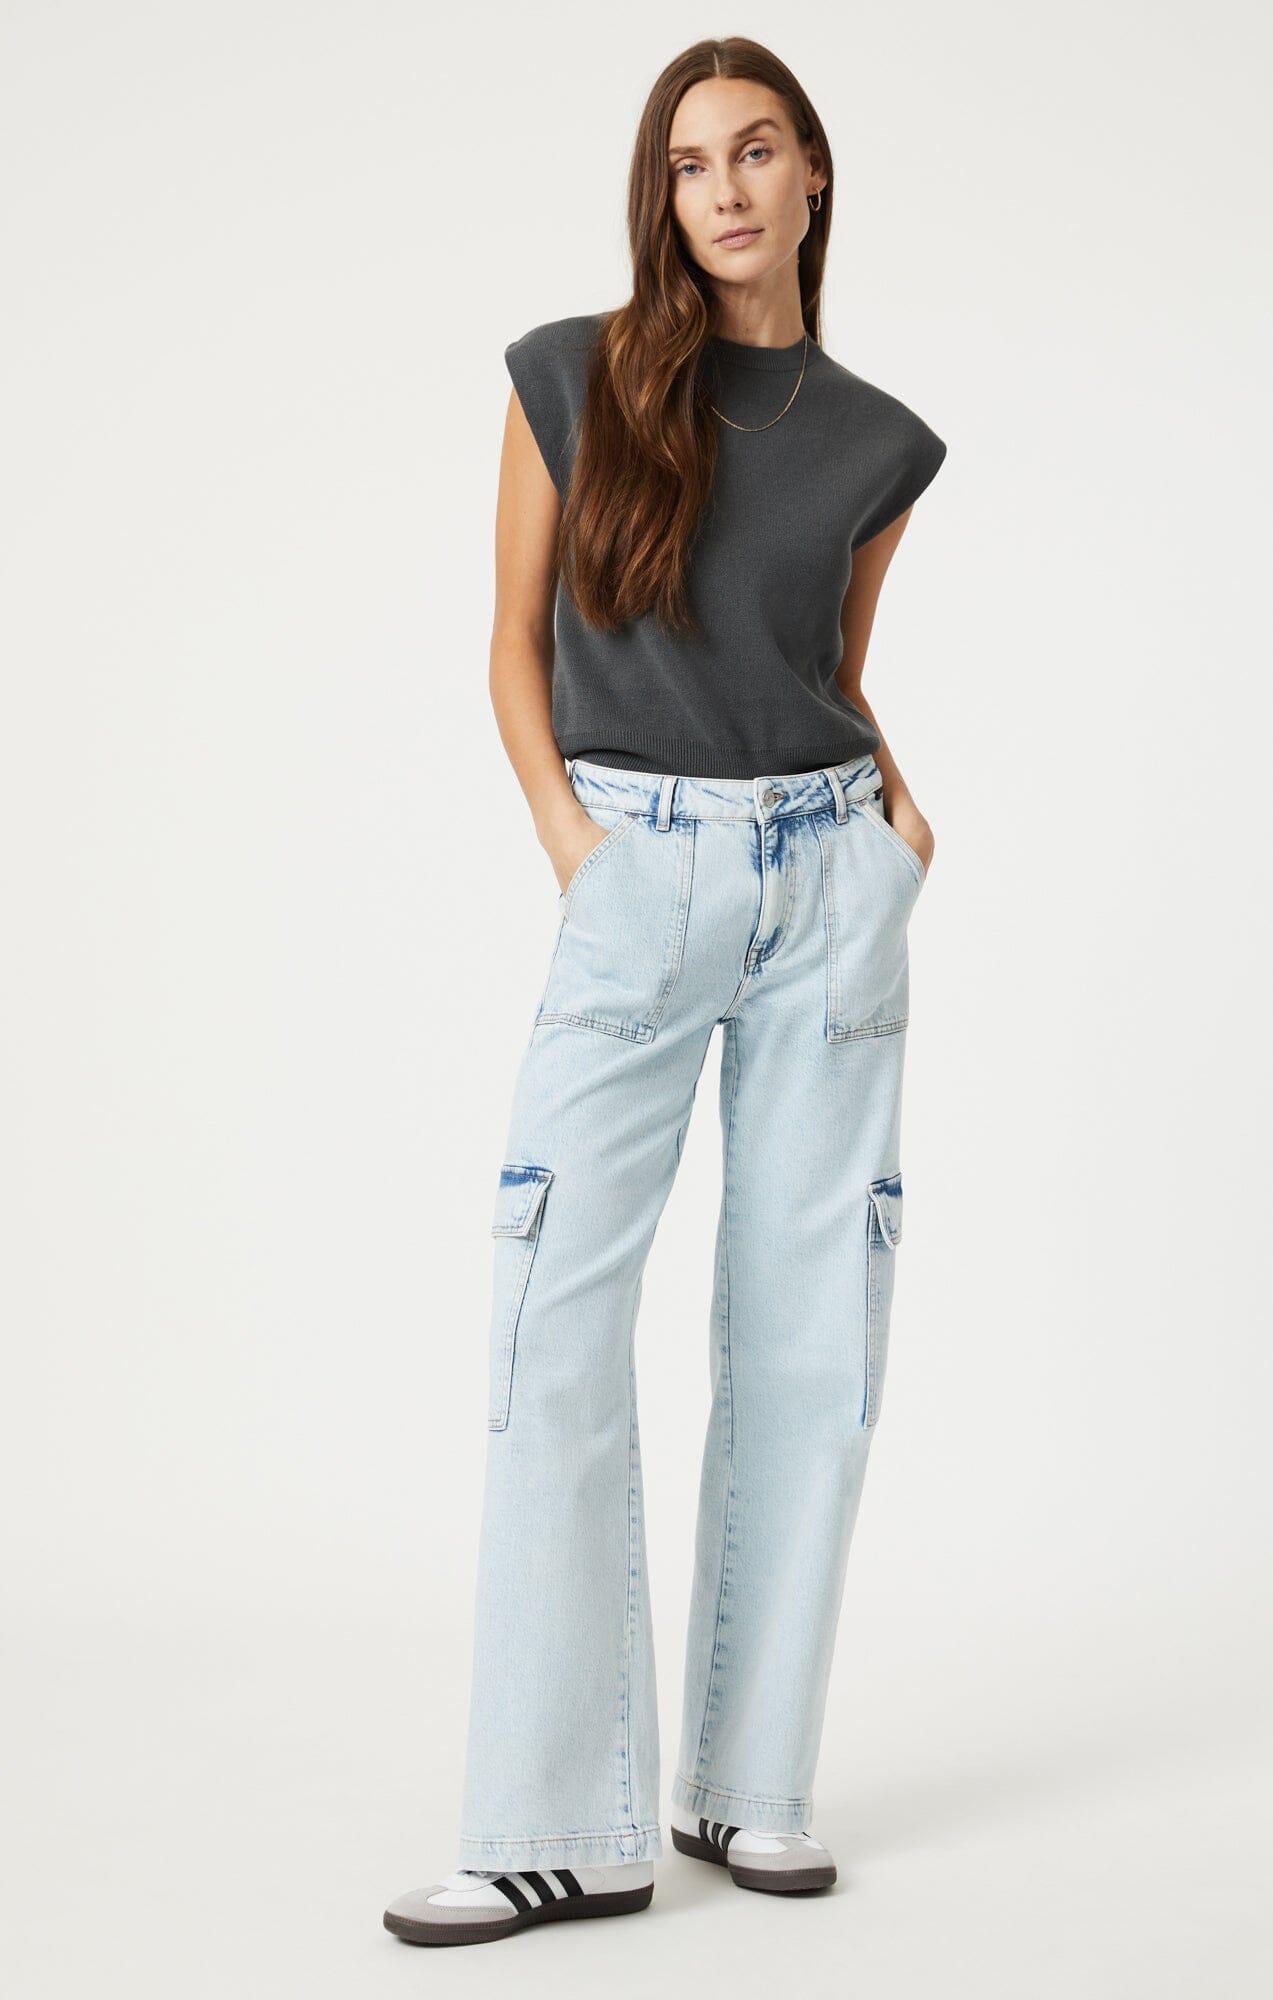 Blue cargo pants in casual style. ⭐ Women's clothing store TM AZURI